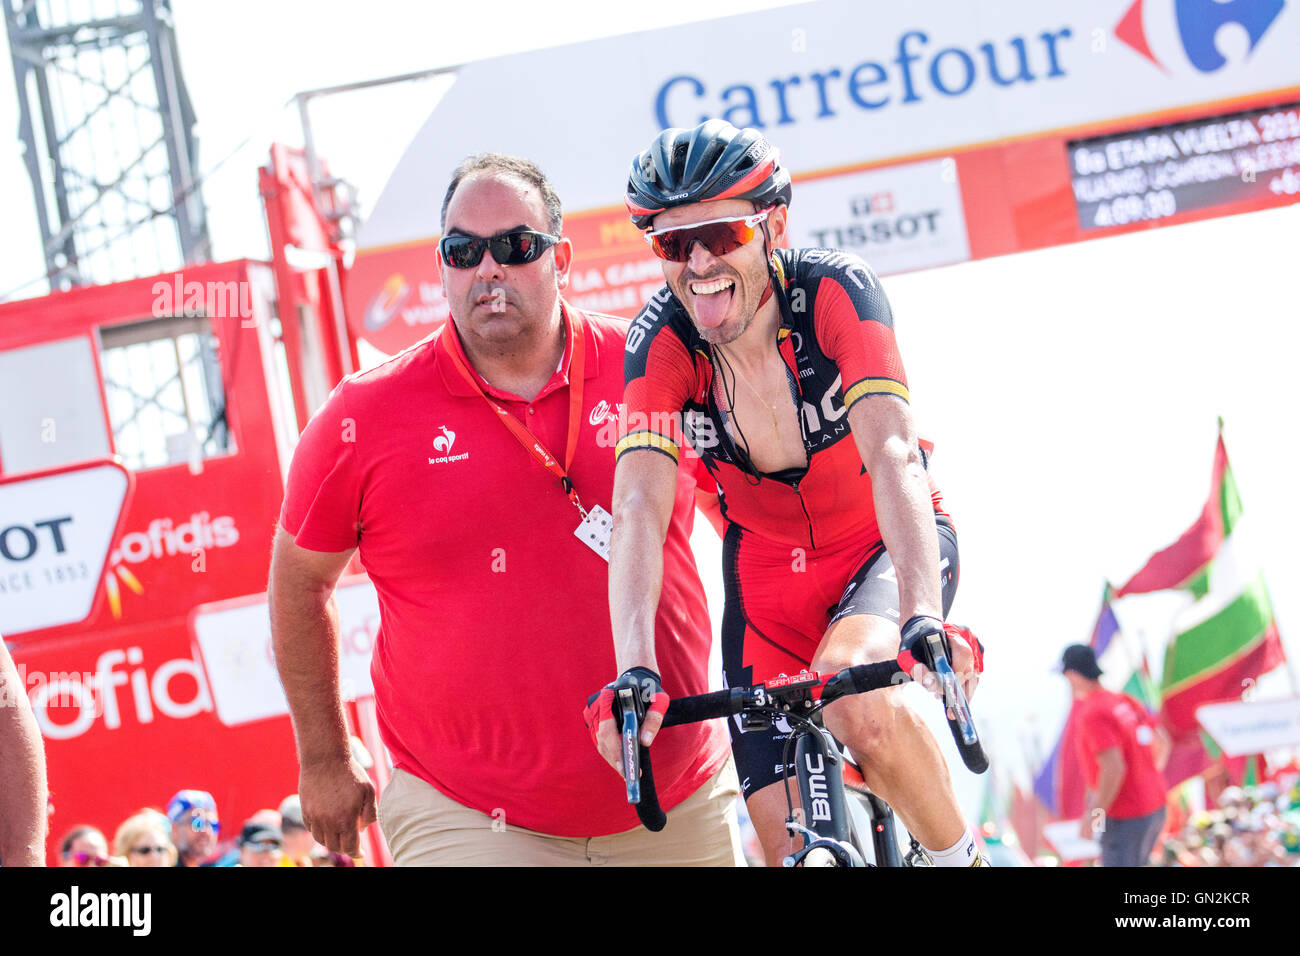 La Camperona, Spain. 27th August, 2016. Samuel Sanchez (BMC Pro Cycling Team) finishes the 8th stage of cycling race ‘La Vuelta a España’ (Tour of Spain) between Villalpando and Climb of La Camperona on August 27, 2016 in Leon, Spain. Credit: David Gato/Alamy Live News Stock Photo